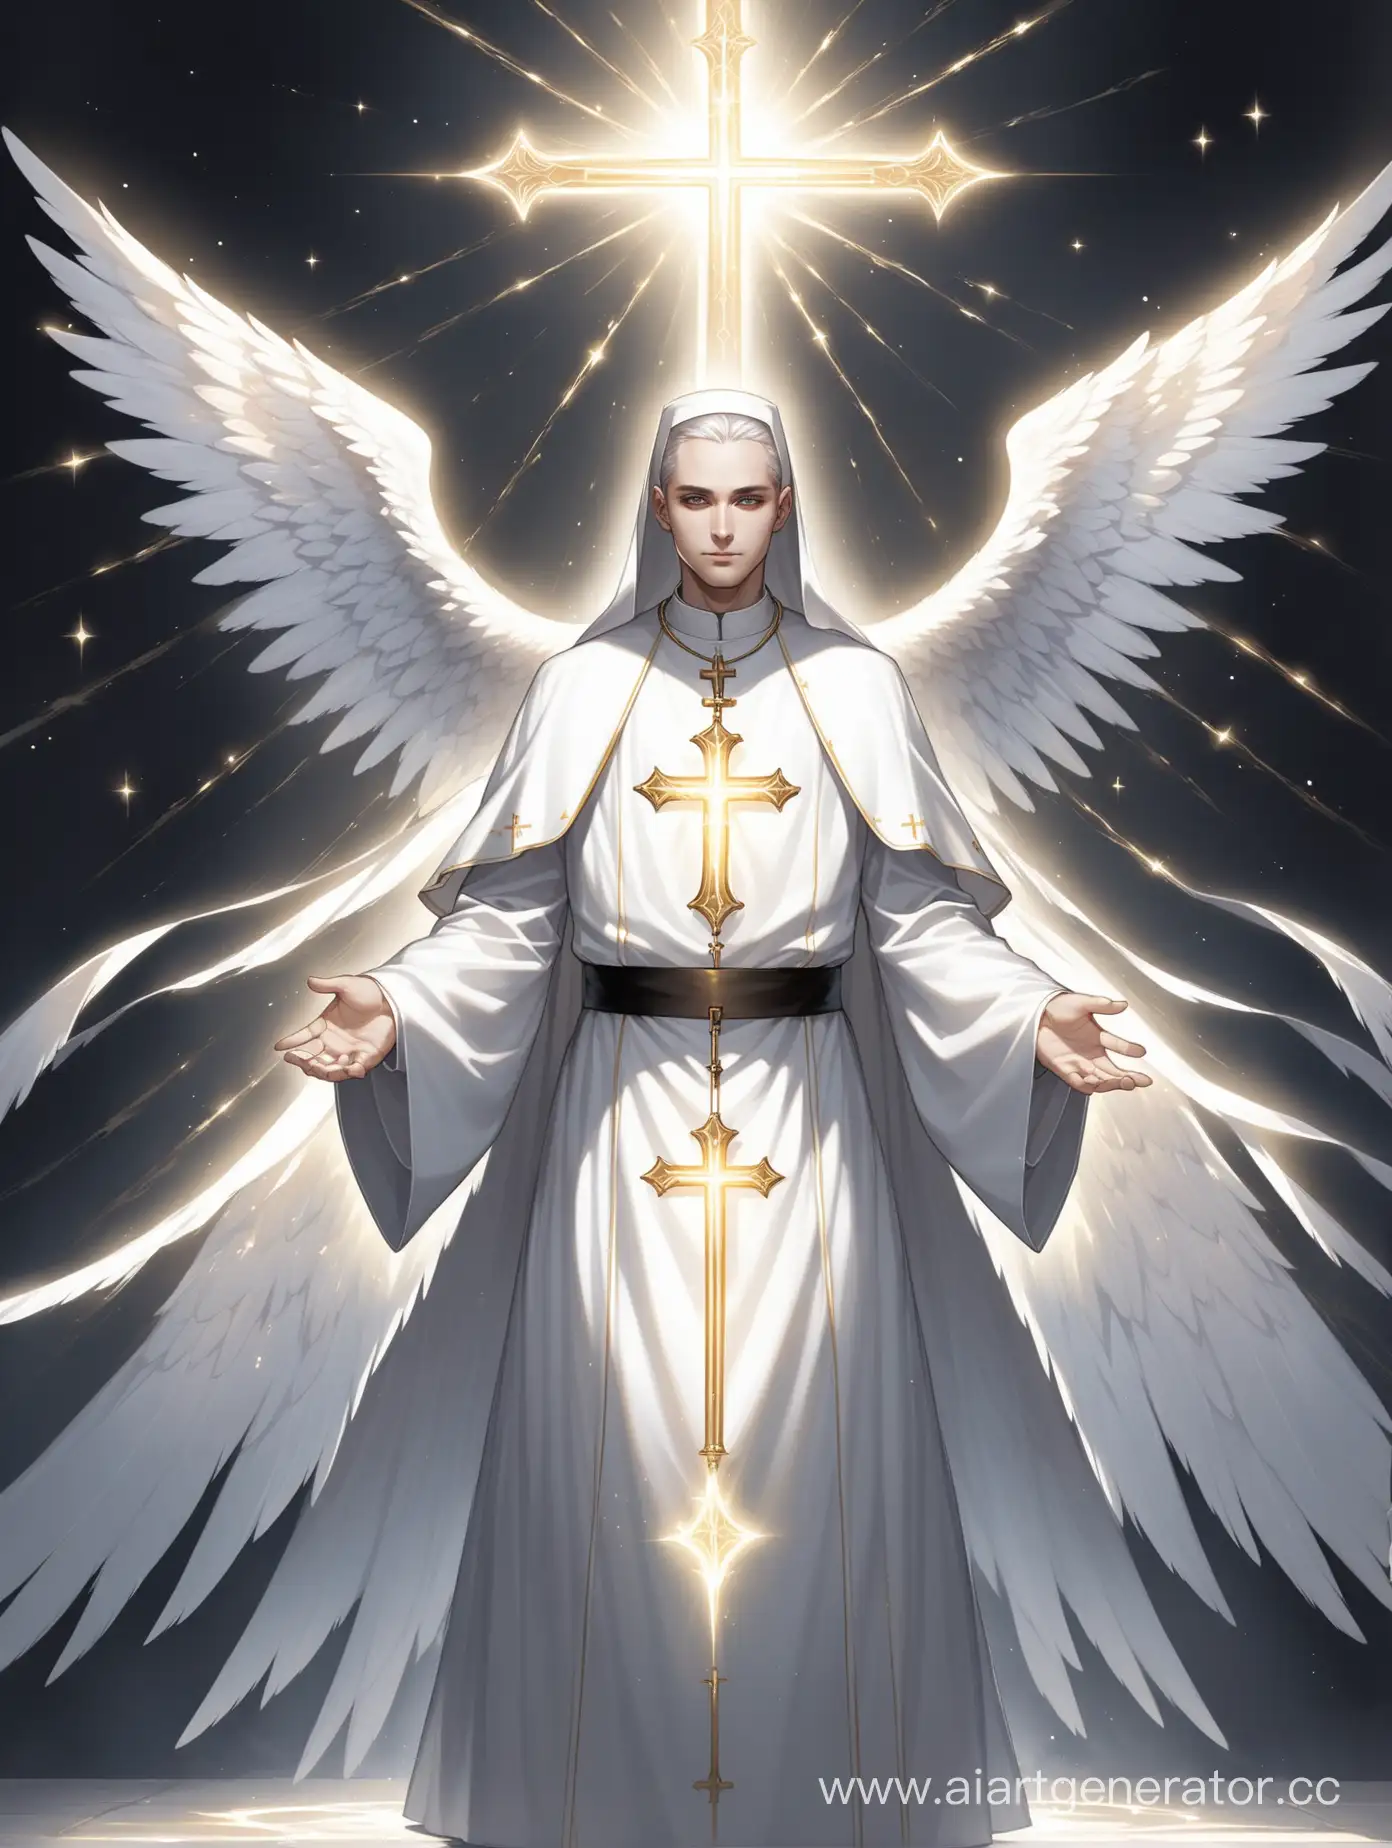 Radiant-Priest-with-Light-Wings-and-Cross-Symbol